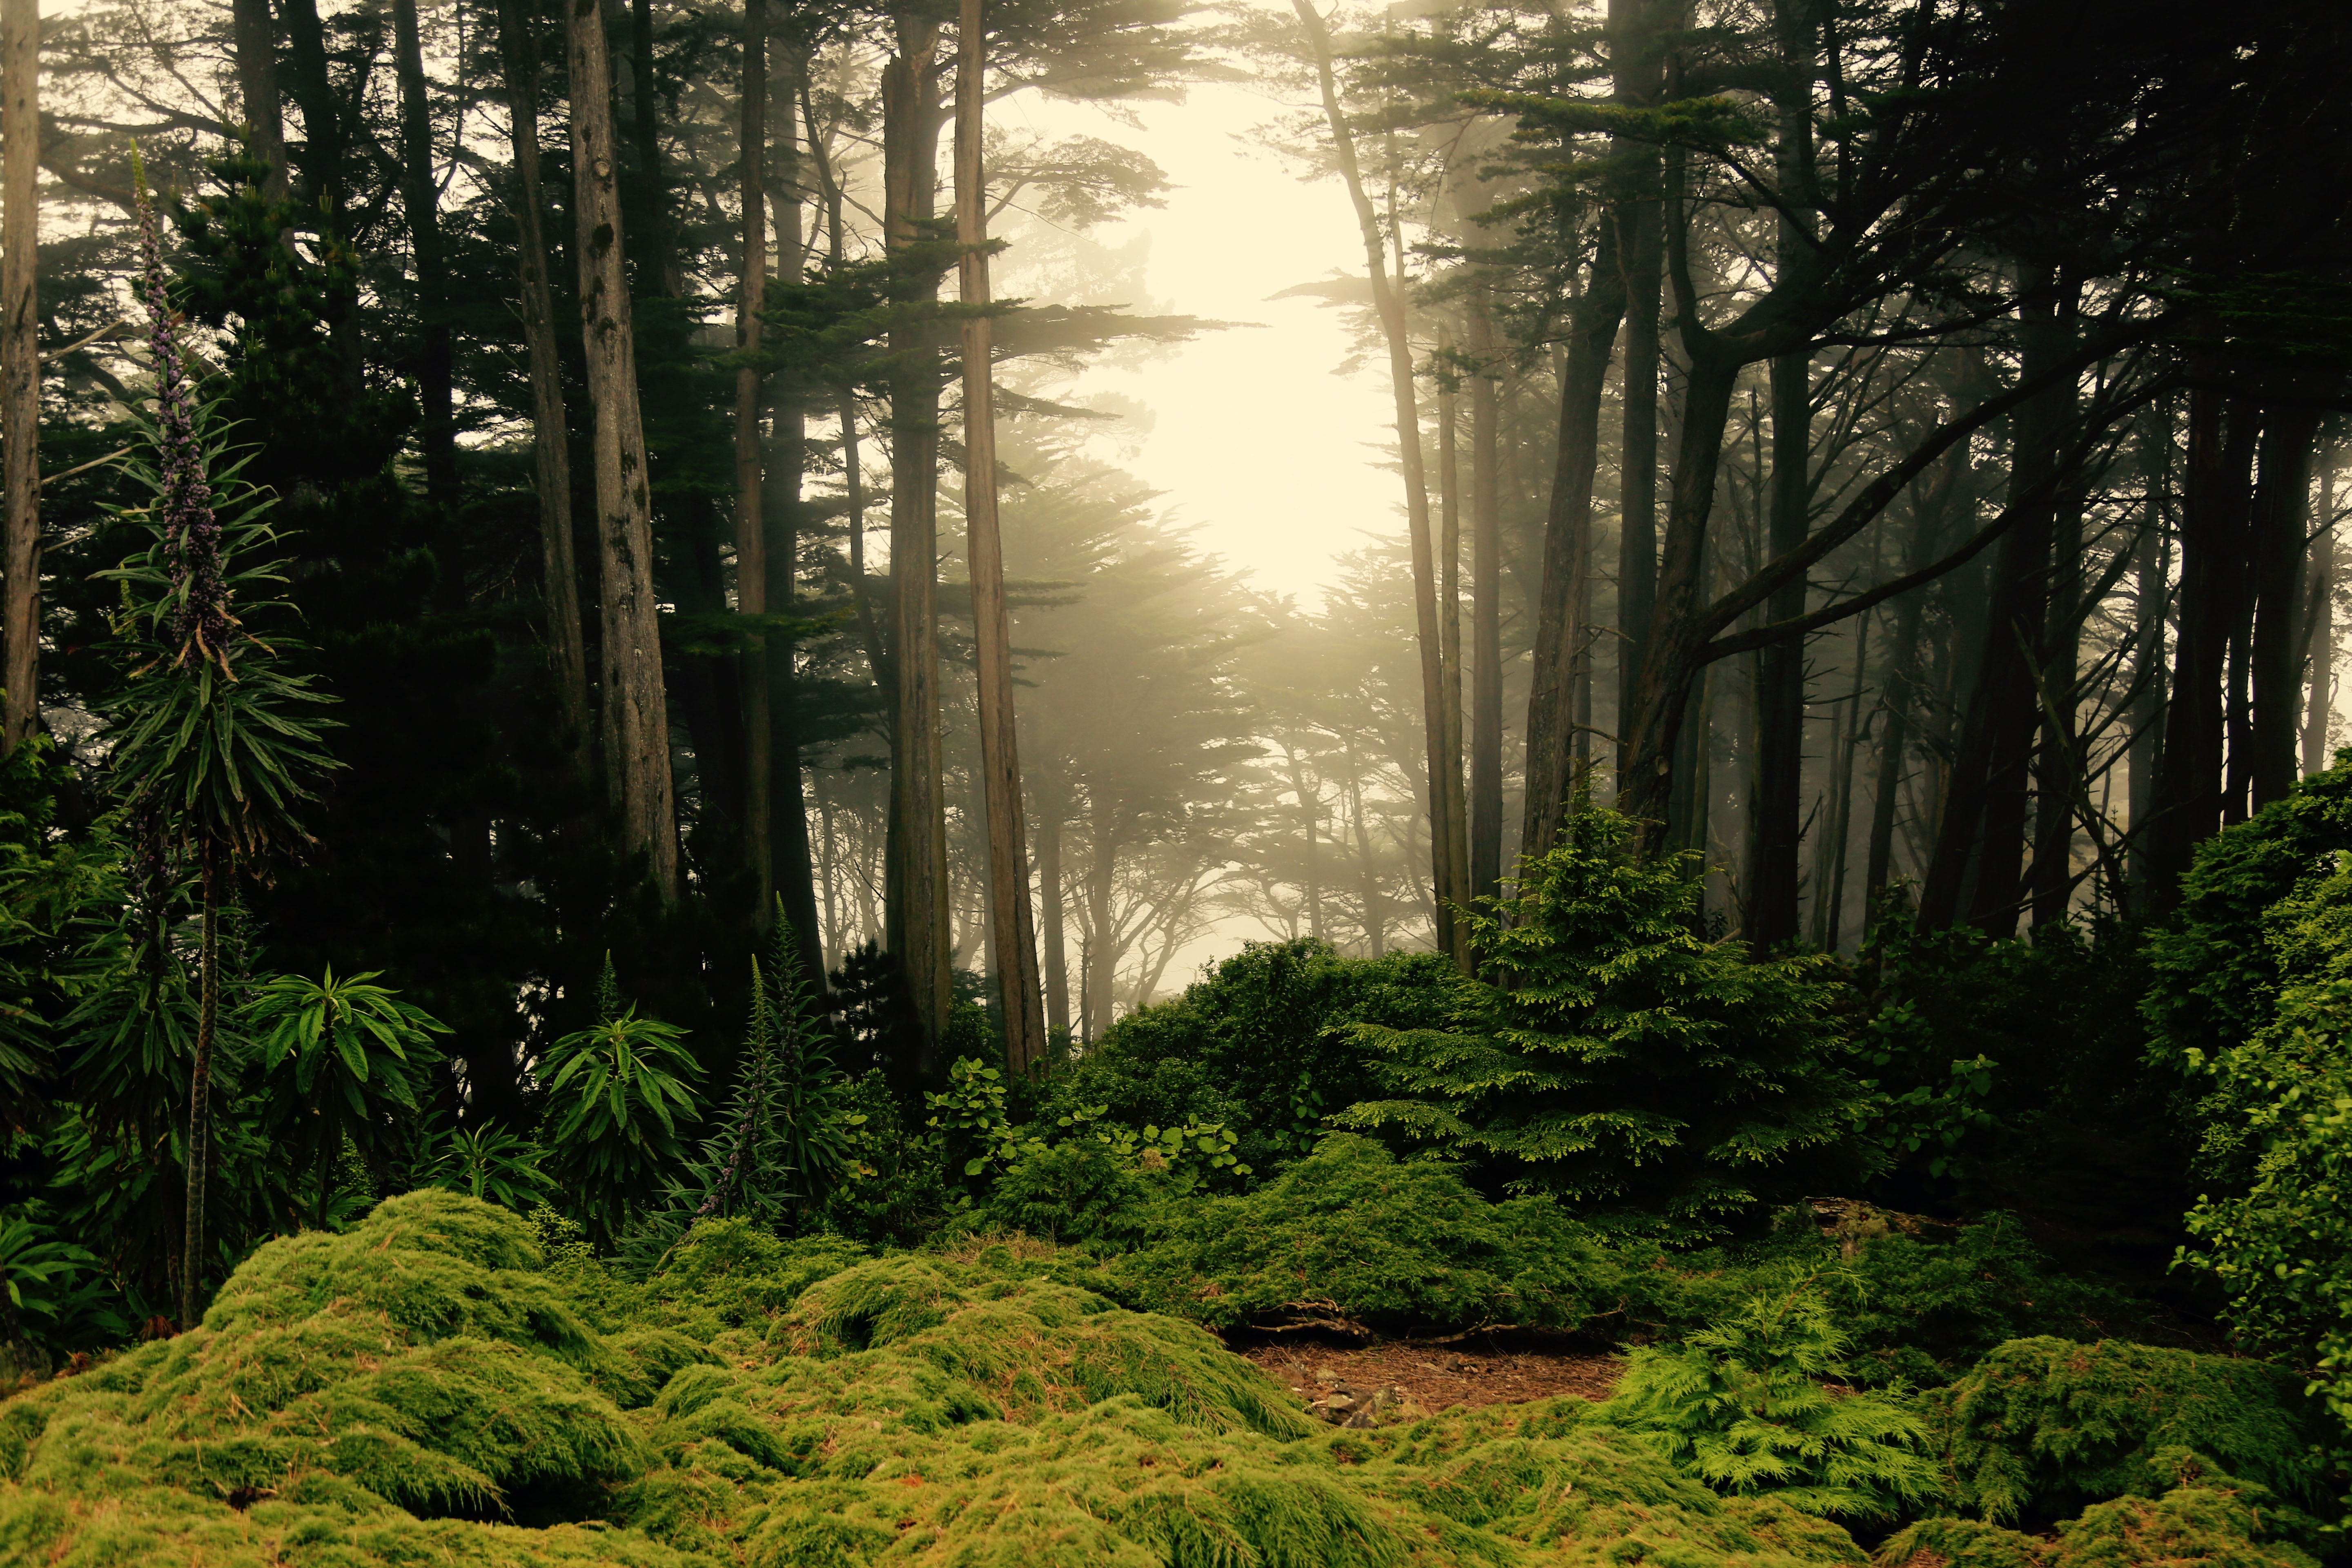 Magical forest scene in New Zealand image - Free stock photo ...